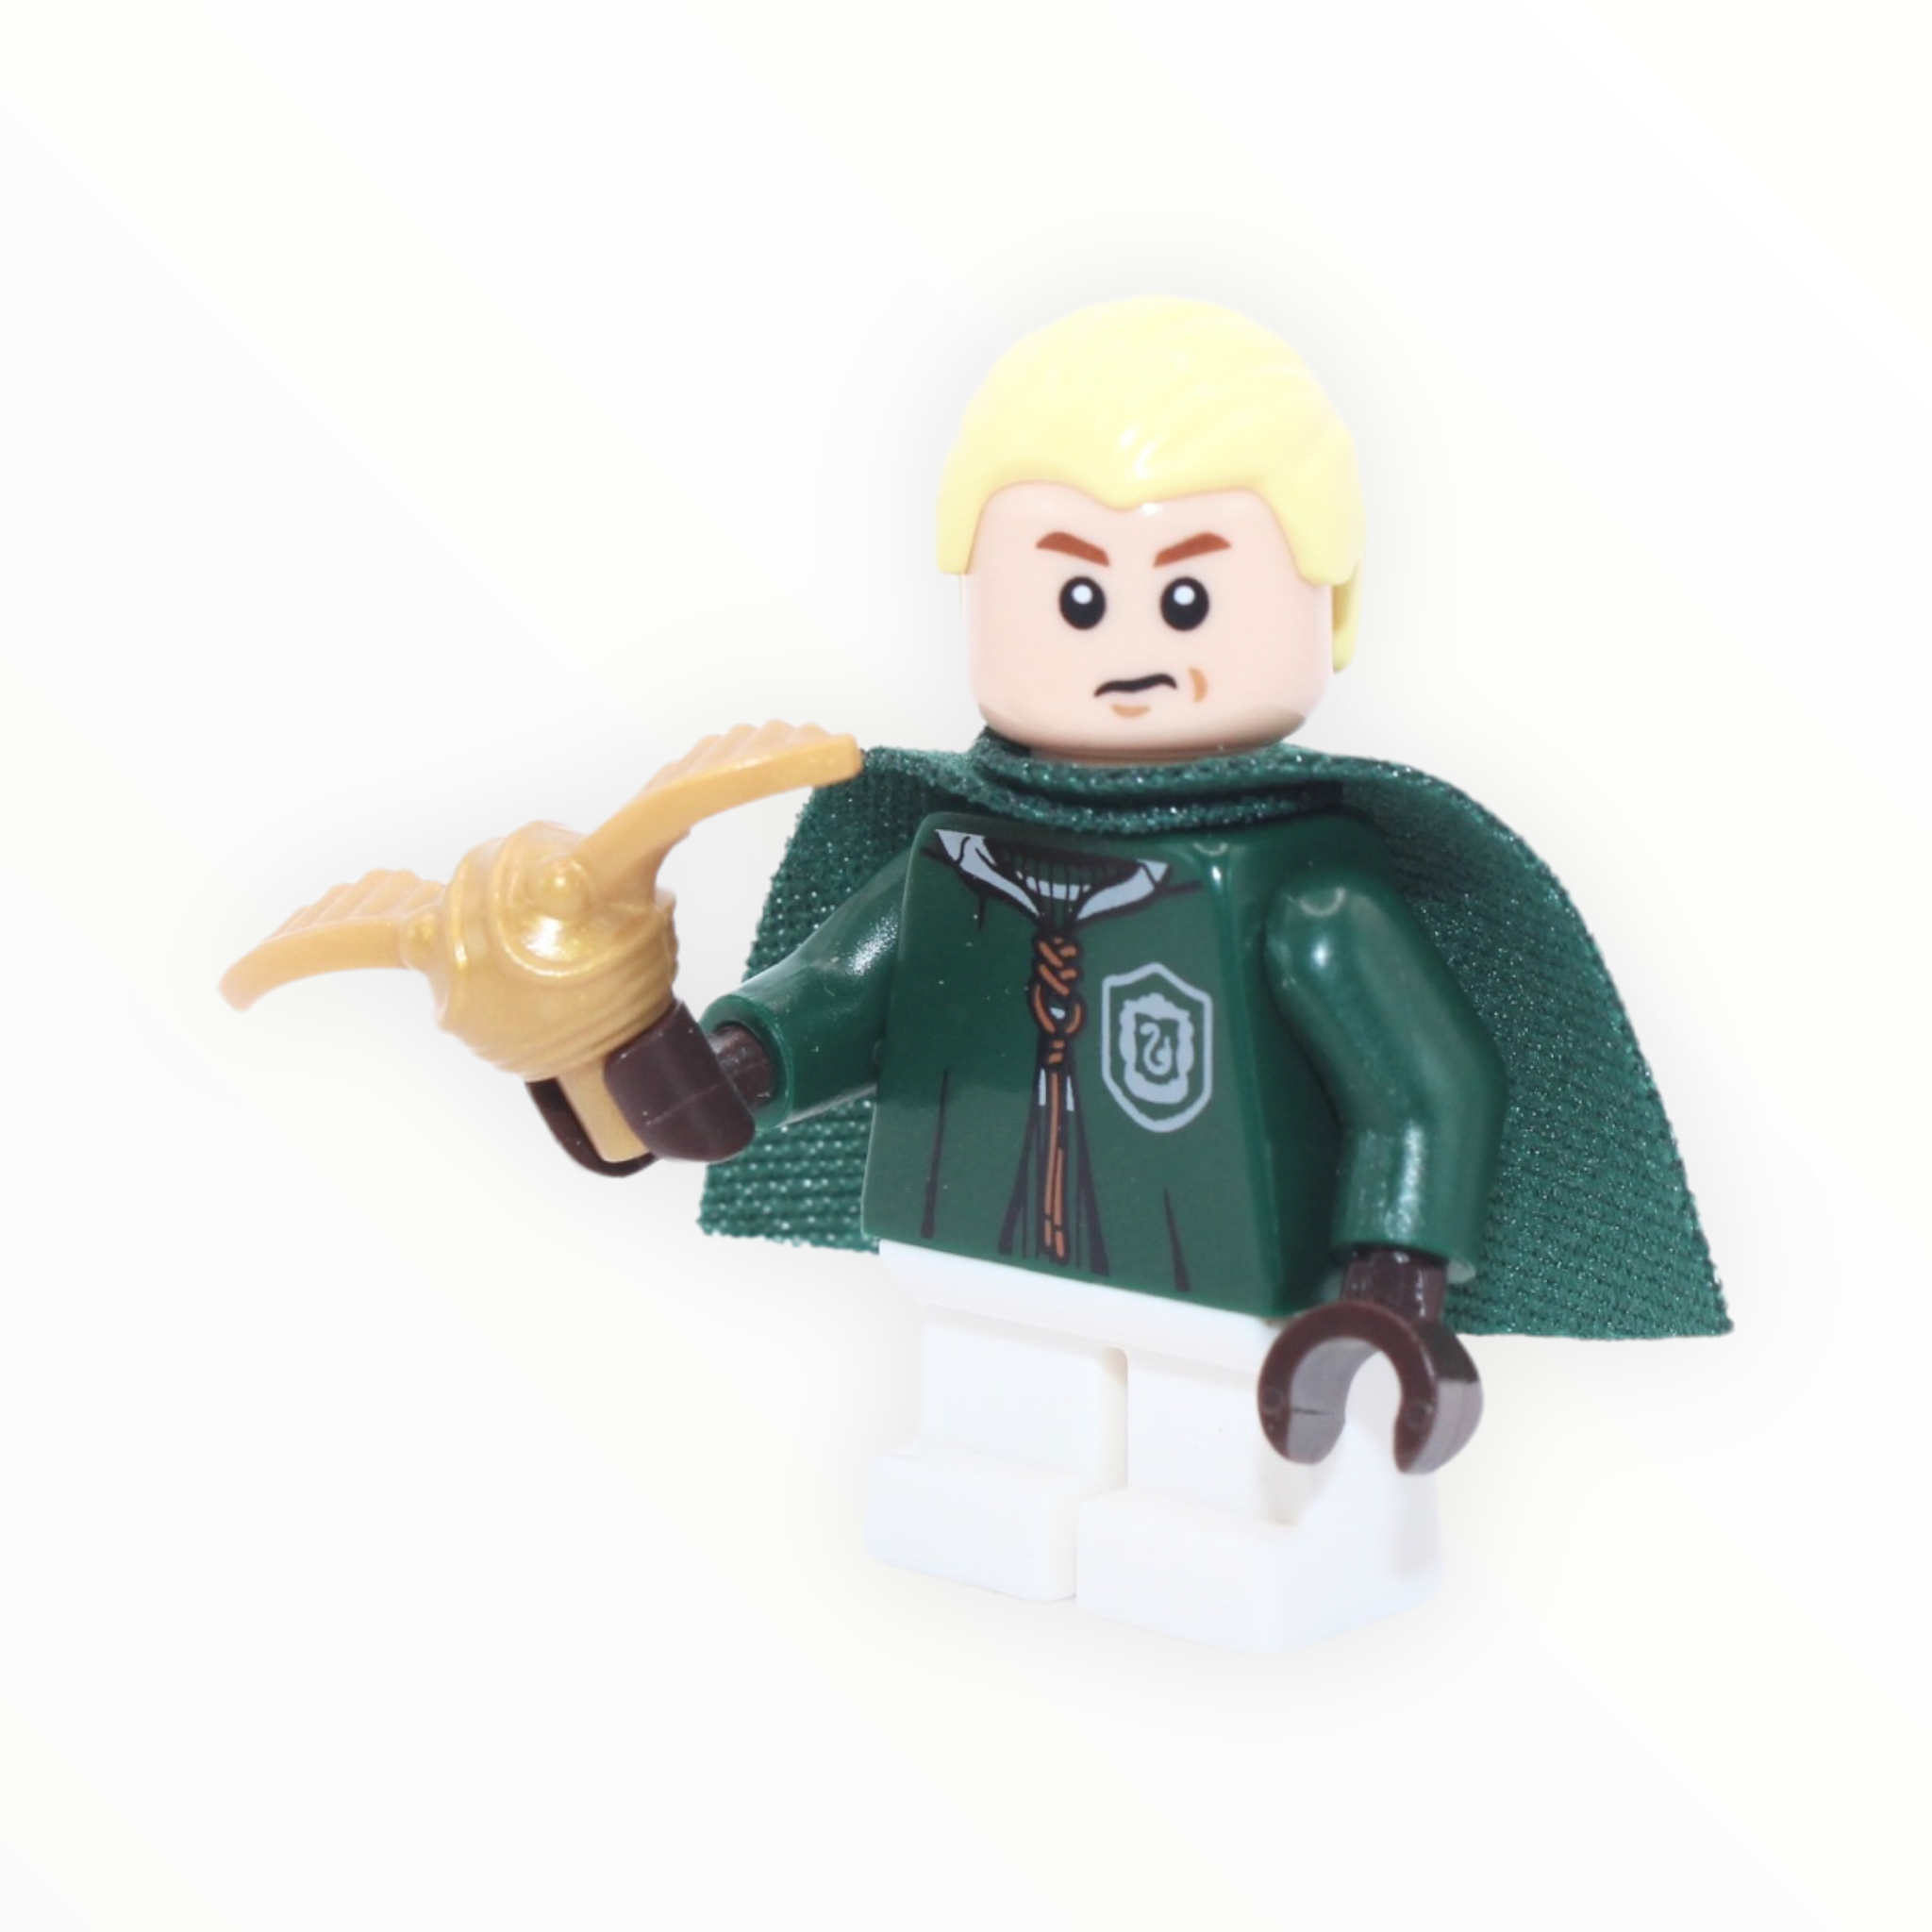 Figurine Harry Potter - Draco Malfoy Quidditch